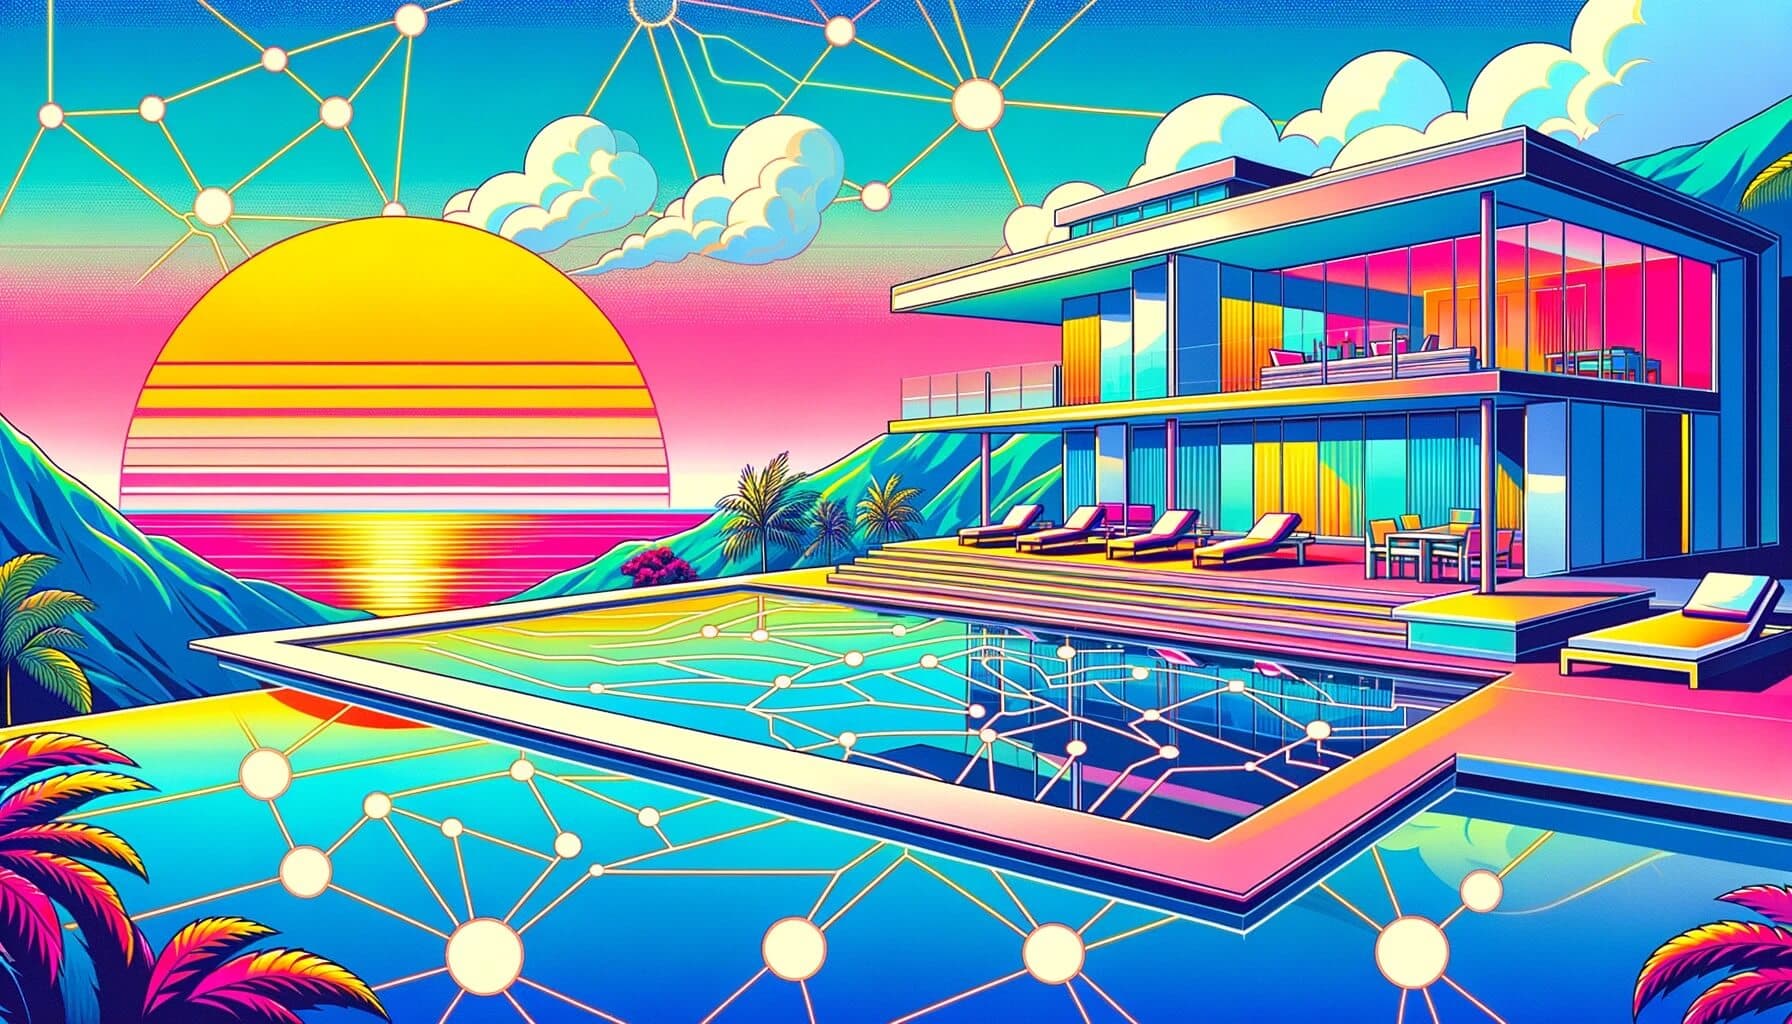 An illustration of a modern city skyline built on futuristic cryptocurrency-based infrastructure, representing the vision of economic centers powered by the BRICS currency's dynamic supply mechanism derived from a formula of economic factors from member states.